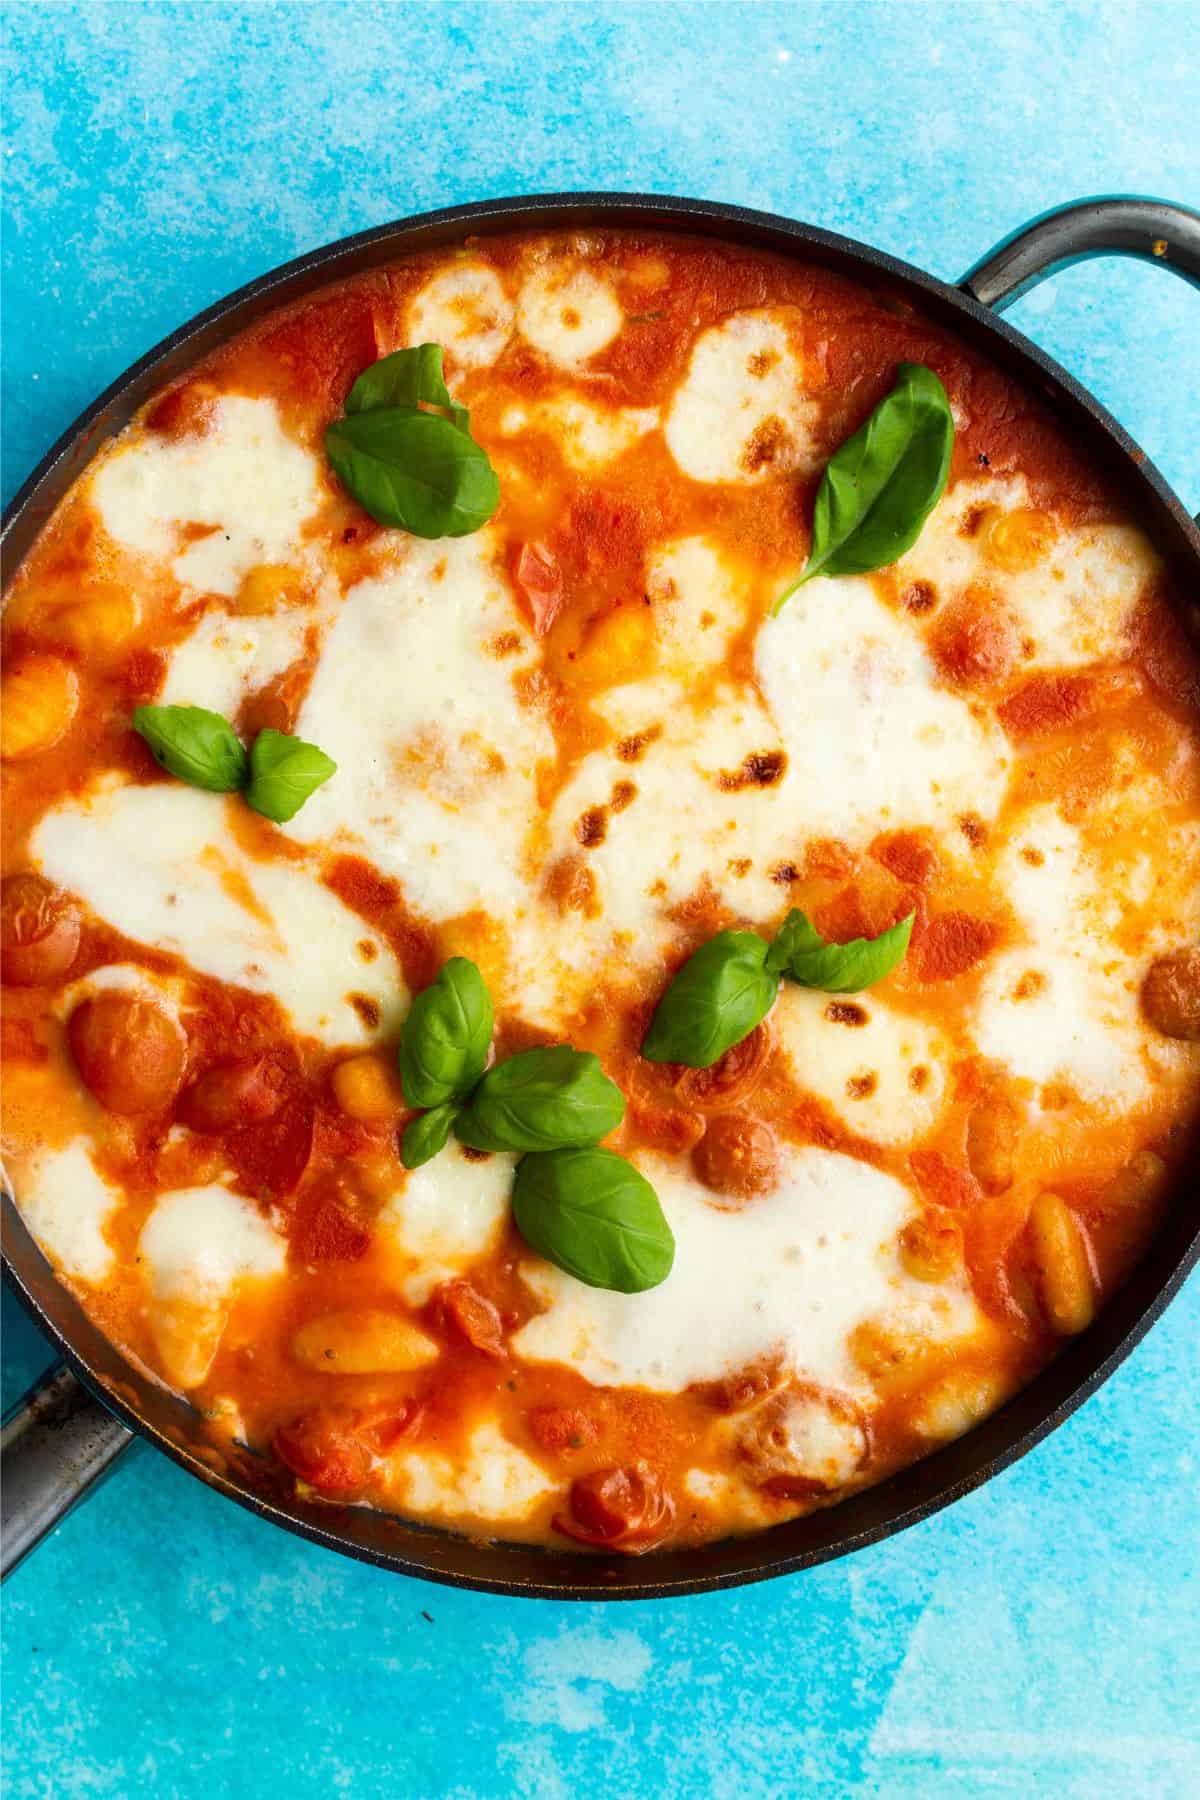 Baked gnocchi with crispy melted cheese and basil to top on a blue background.